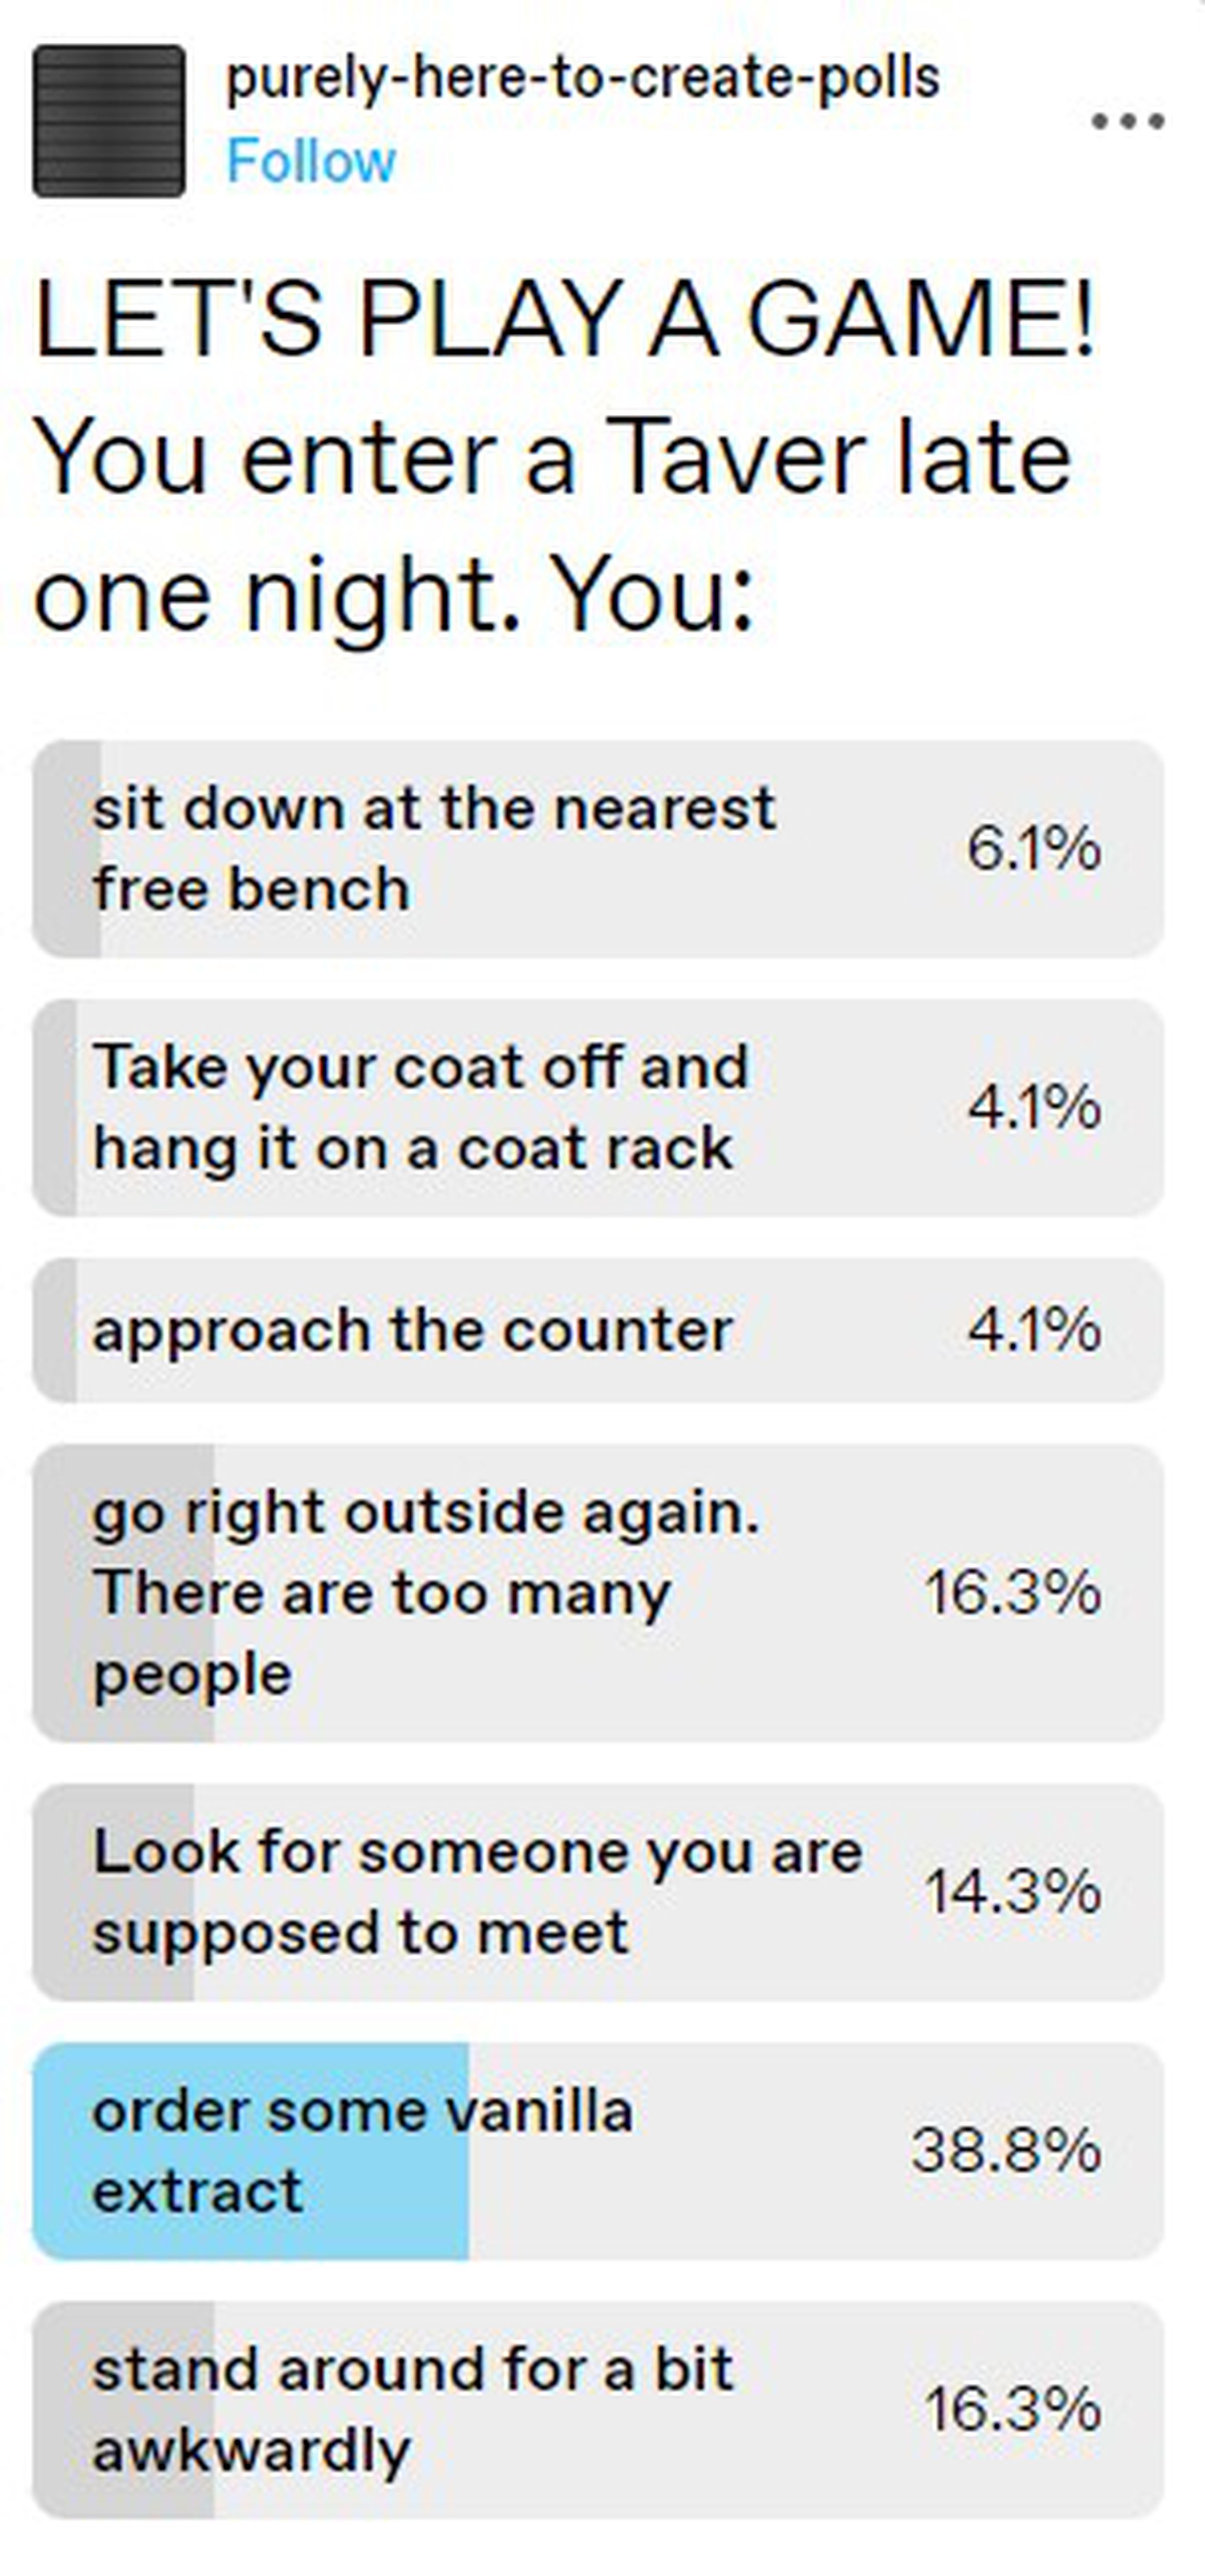 A Tumblr poll displaying various options for a text-based adventure roleplay where a user enters a tavern. The winning results says “order some vanilla extract.”